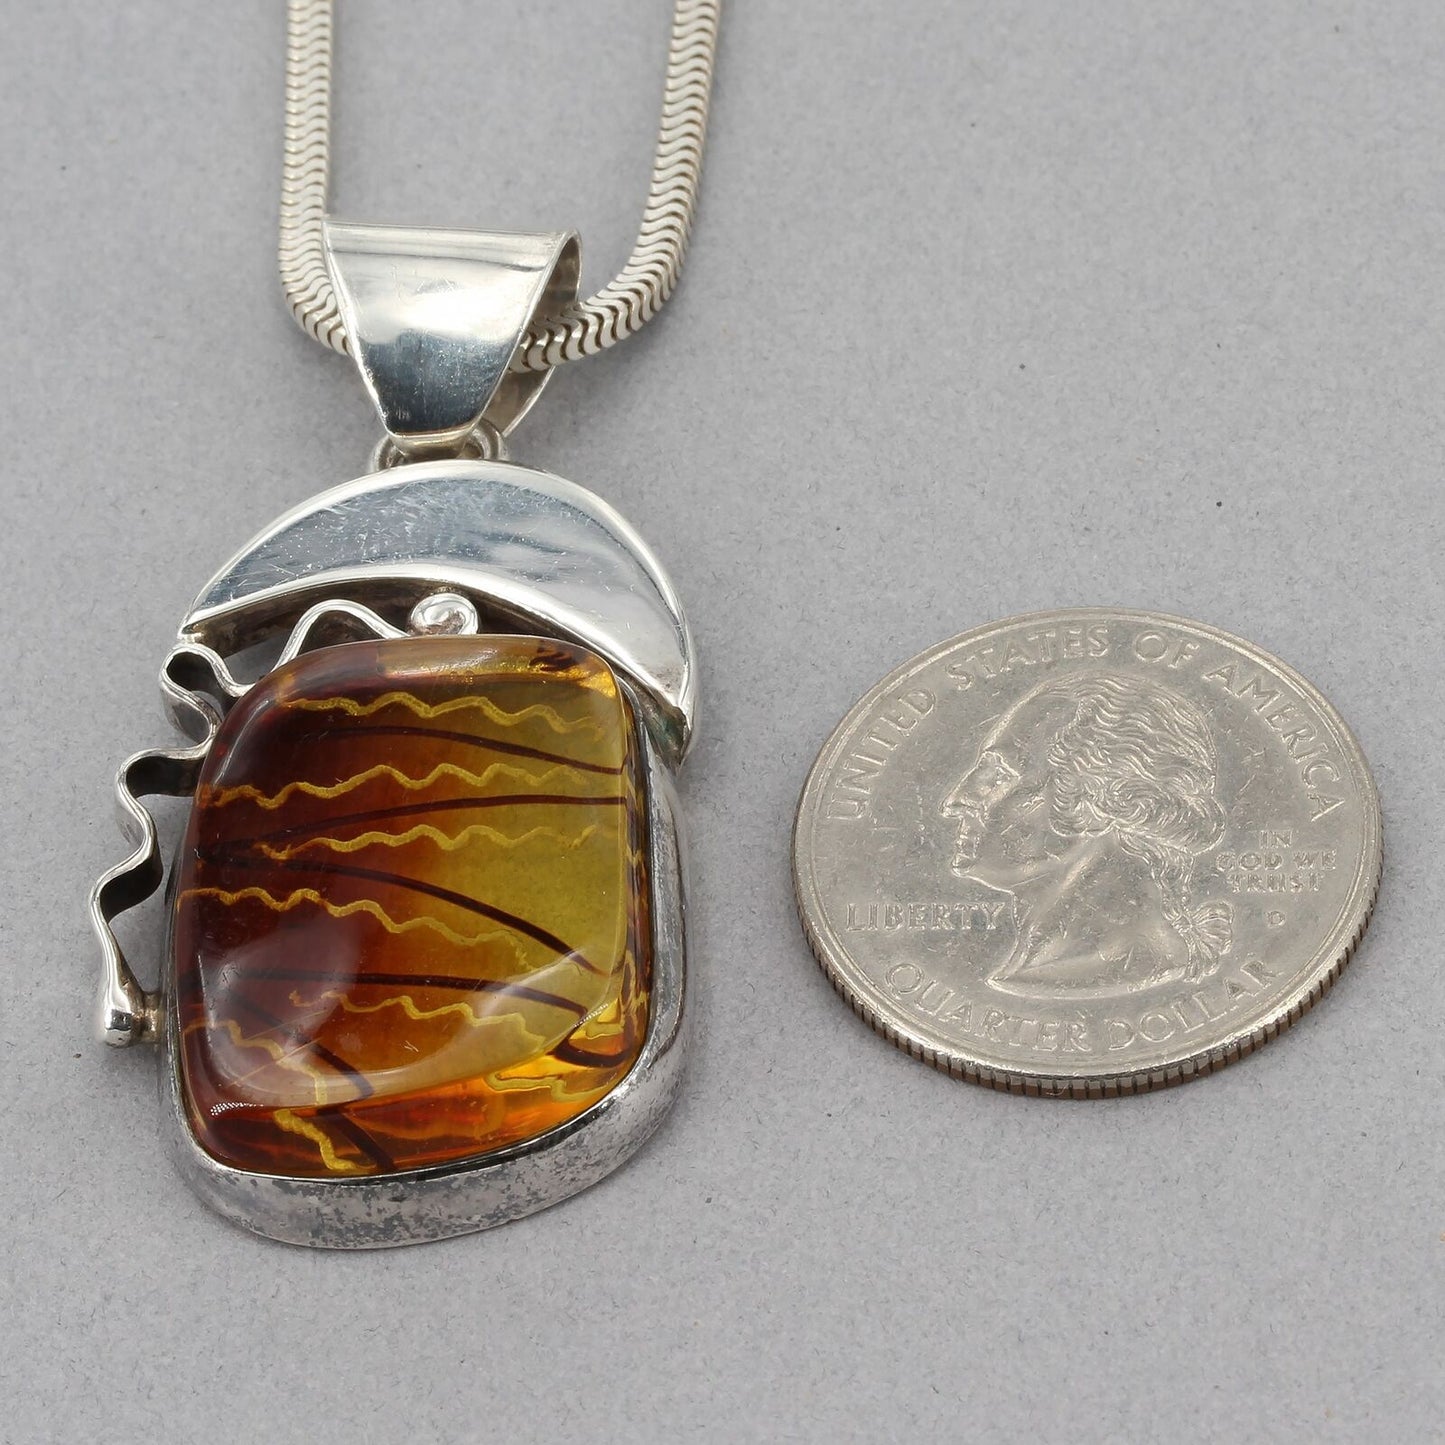 Unique Artisan Handcrafted Reverse Carved Baltic Amber Sterling Pendant Necklace